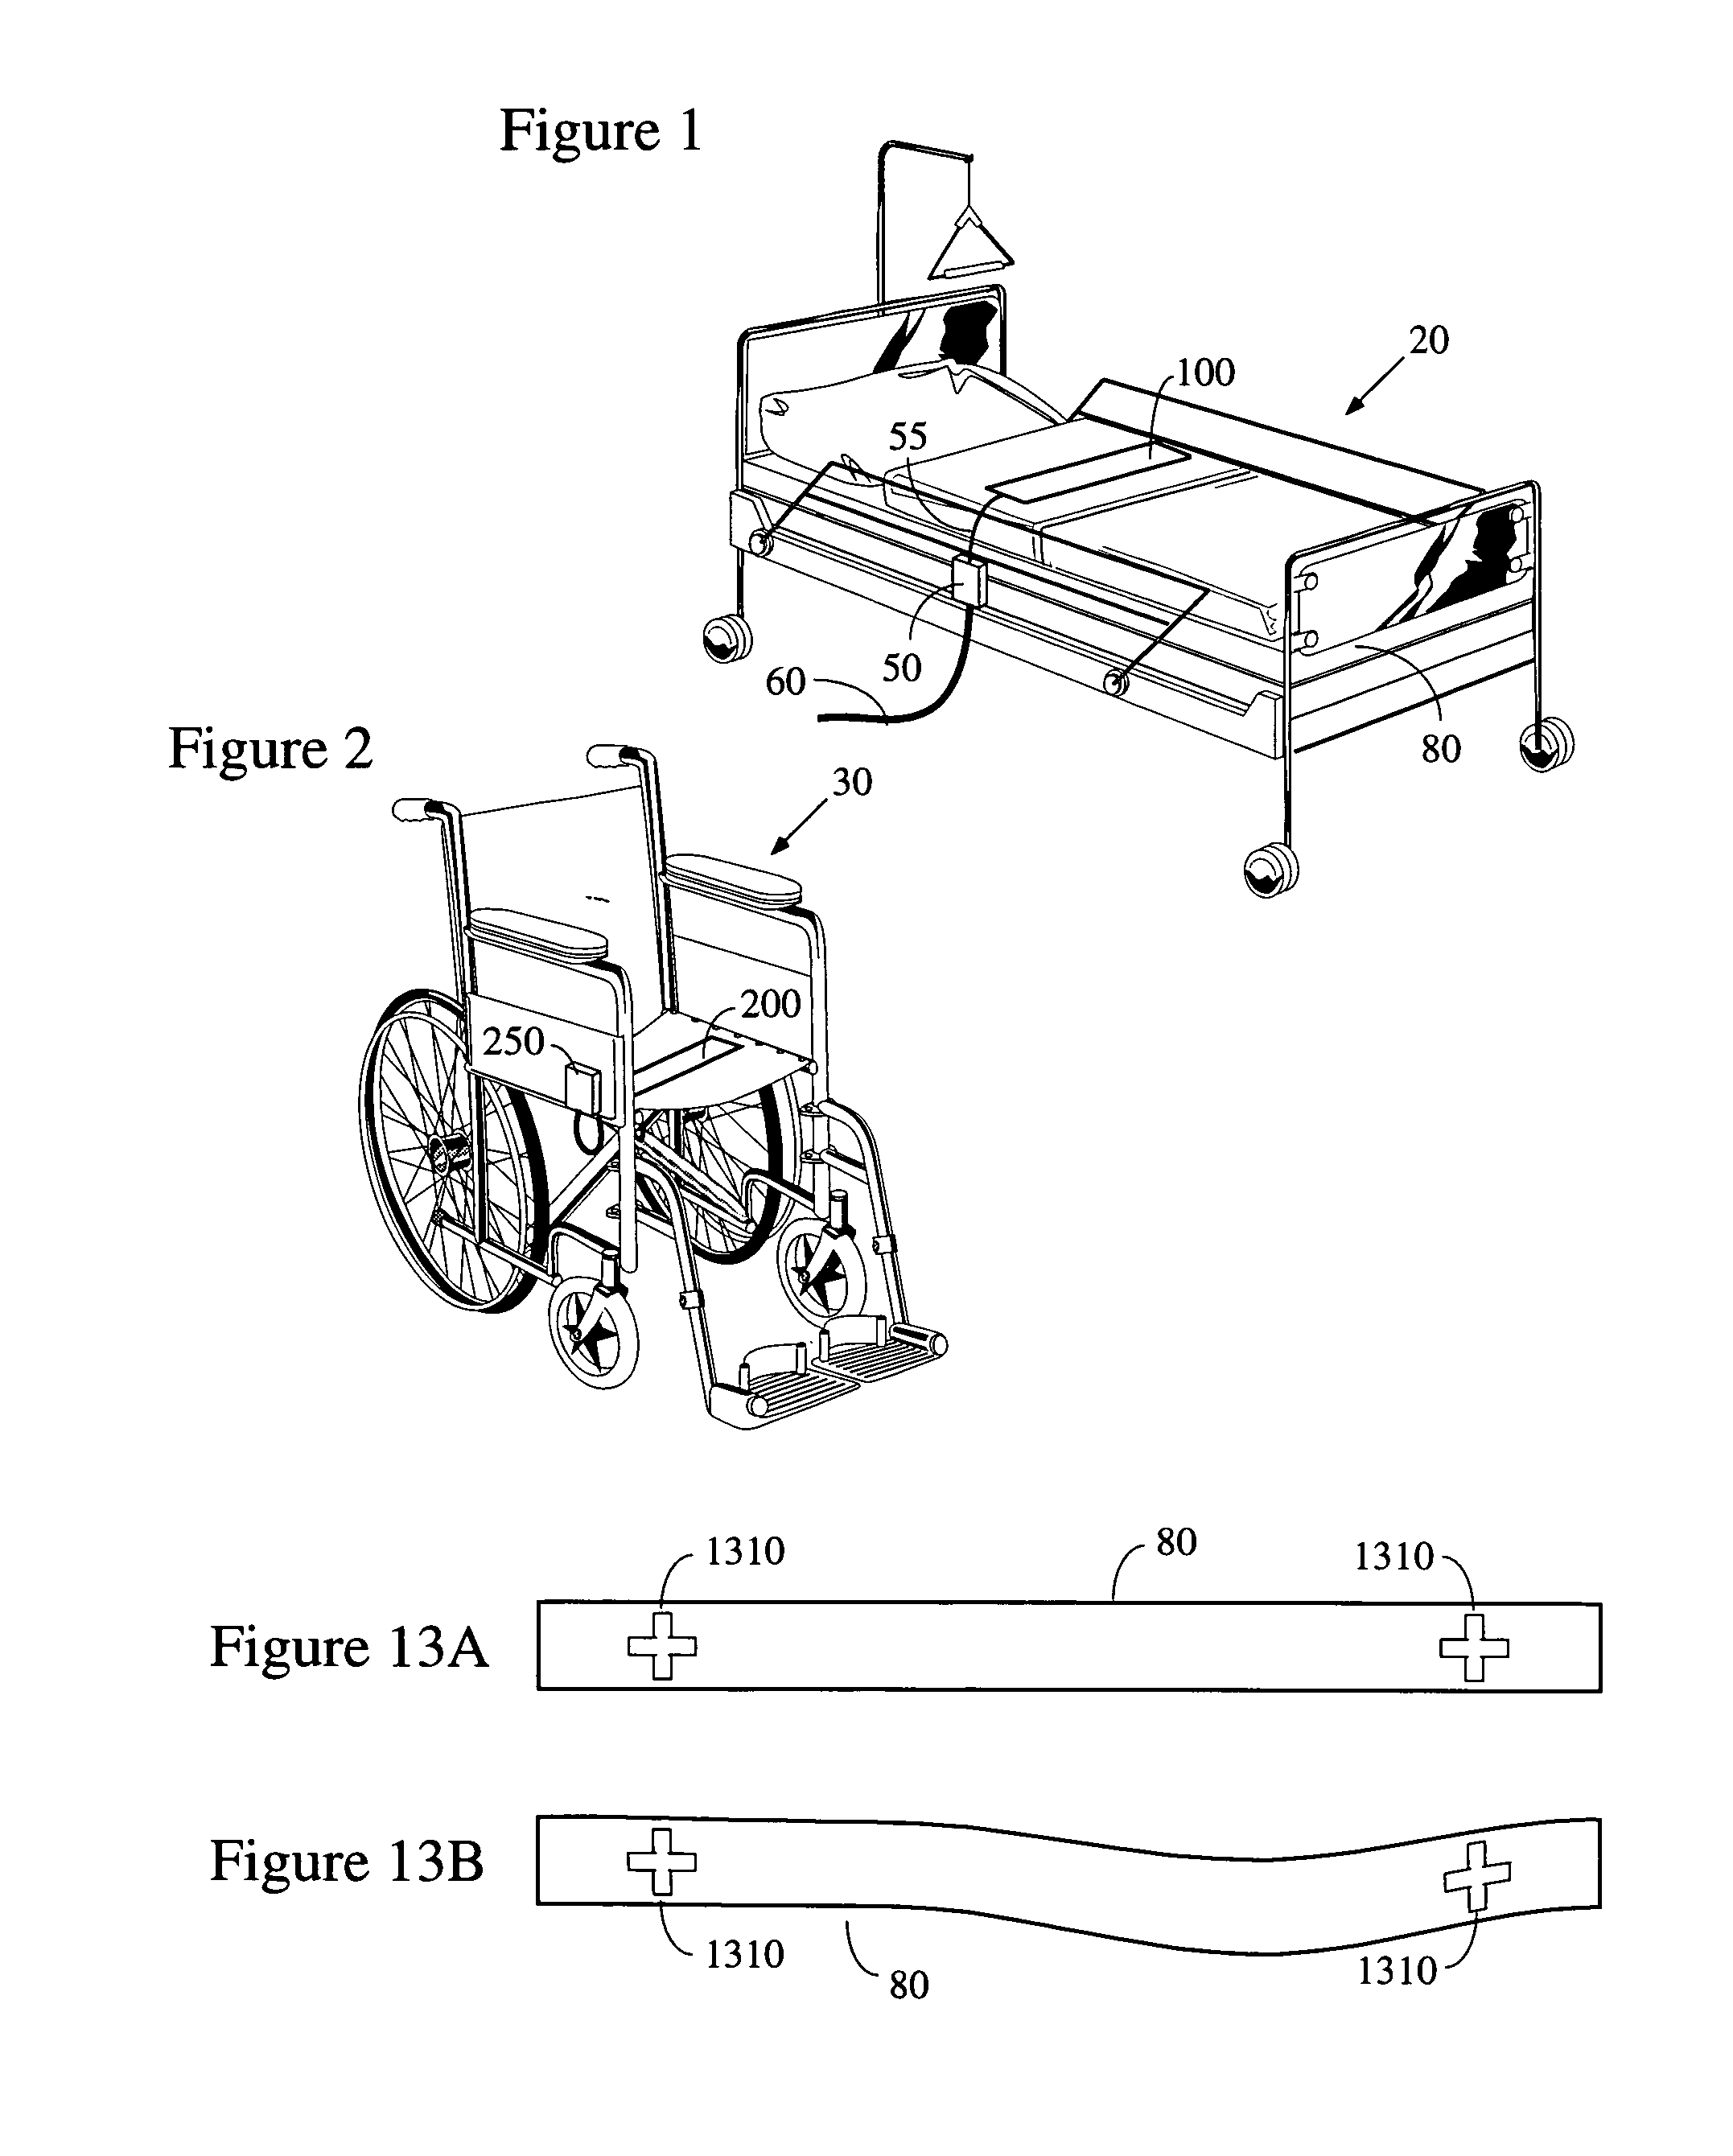 Method and apparatus for mitigating the risk of pressure sores